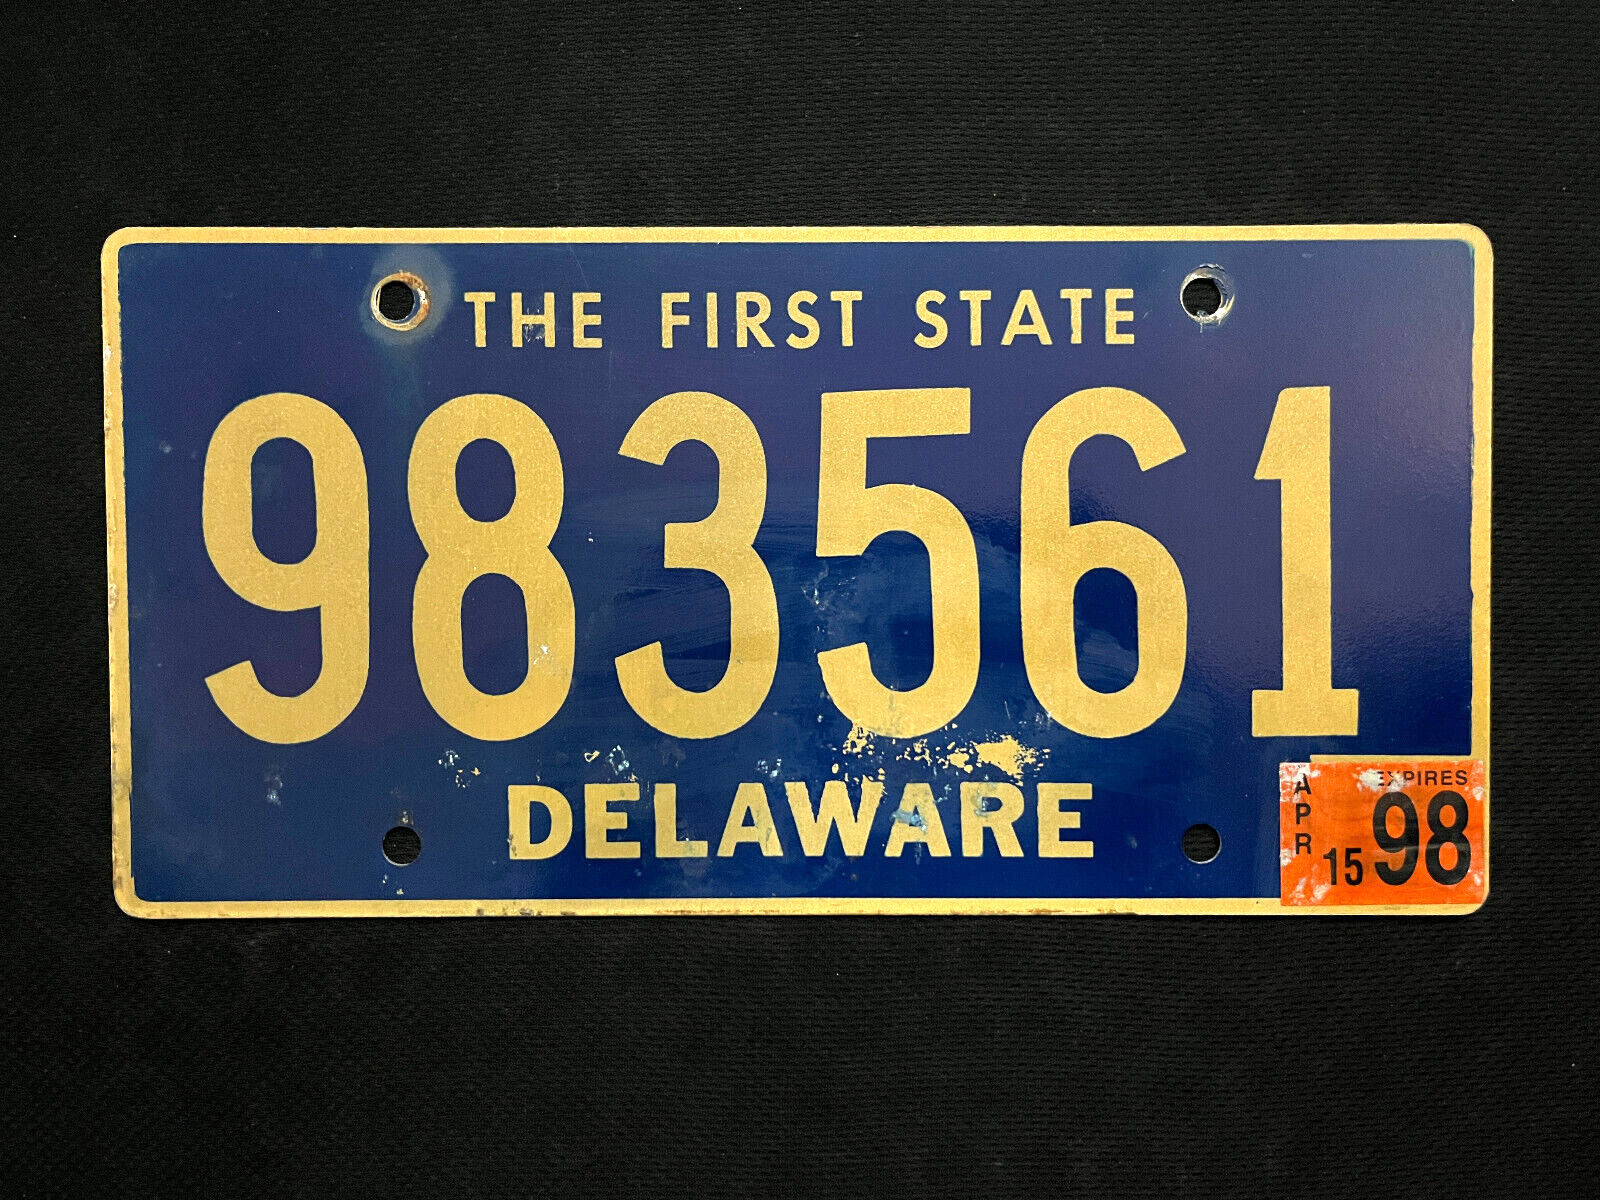 1998 Delaware License Plate 983561 .. THE FIRST STATE, BEAUTIFUL YELLOW ON BLUE